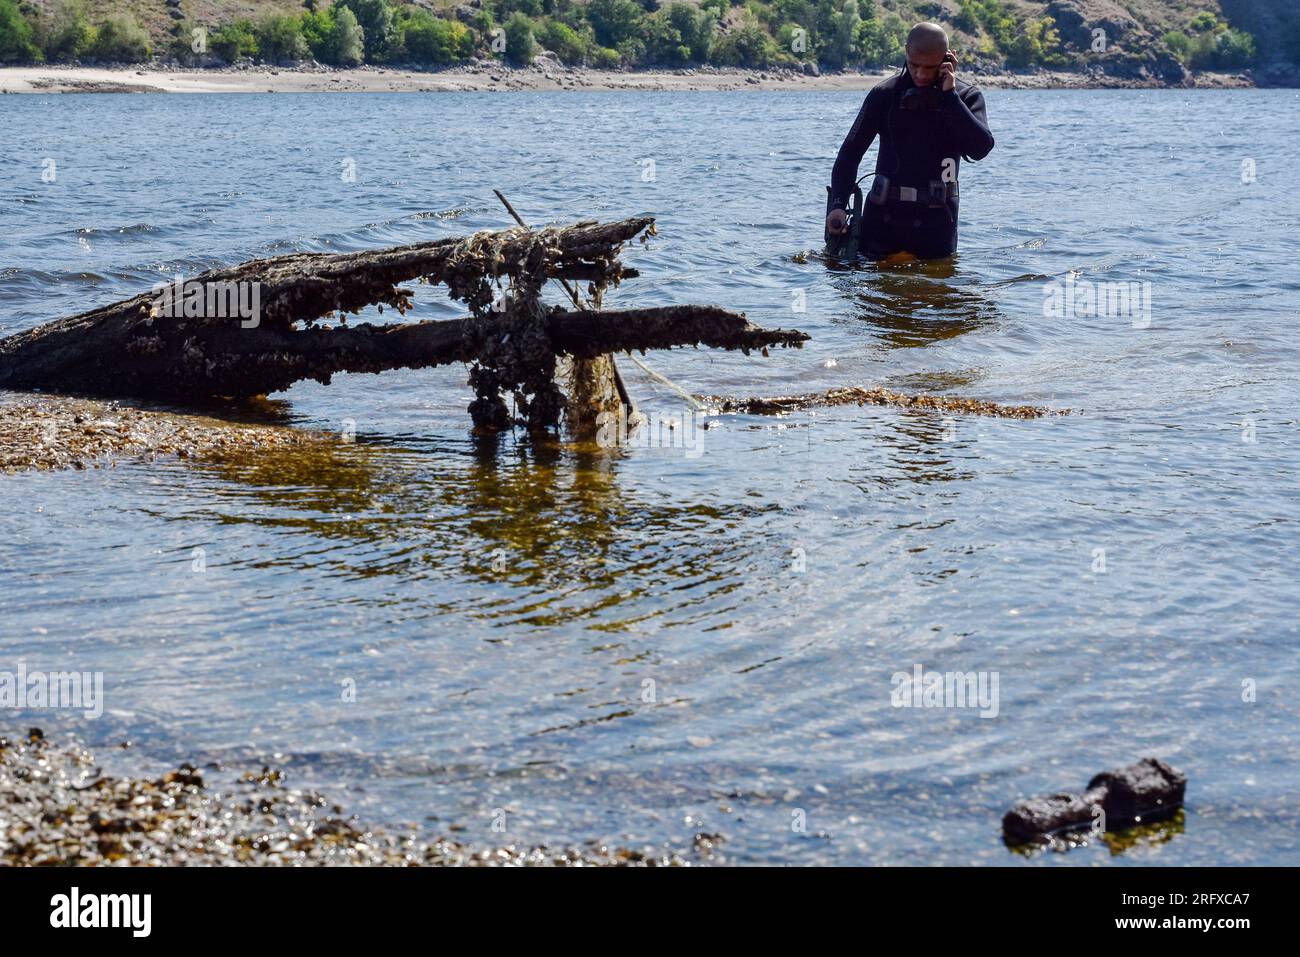 A Ukrainian sapper inspects the river during the demining of a Dnipro river in Zaporizhzhia. Ukraine’s international partners will give it over US$244 million for humanitarian mine clearance. Source: Yuliia Svyrydenko, First Deputy Prime Minister and Minister of Economic Development and Trade of Ukraine. Ukraine will also receive individual mine clearance kits, explosive protective suits, quadcopters, and robotic systems for the disposal of ammunition. Stock Photo